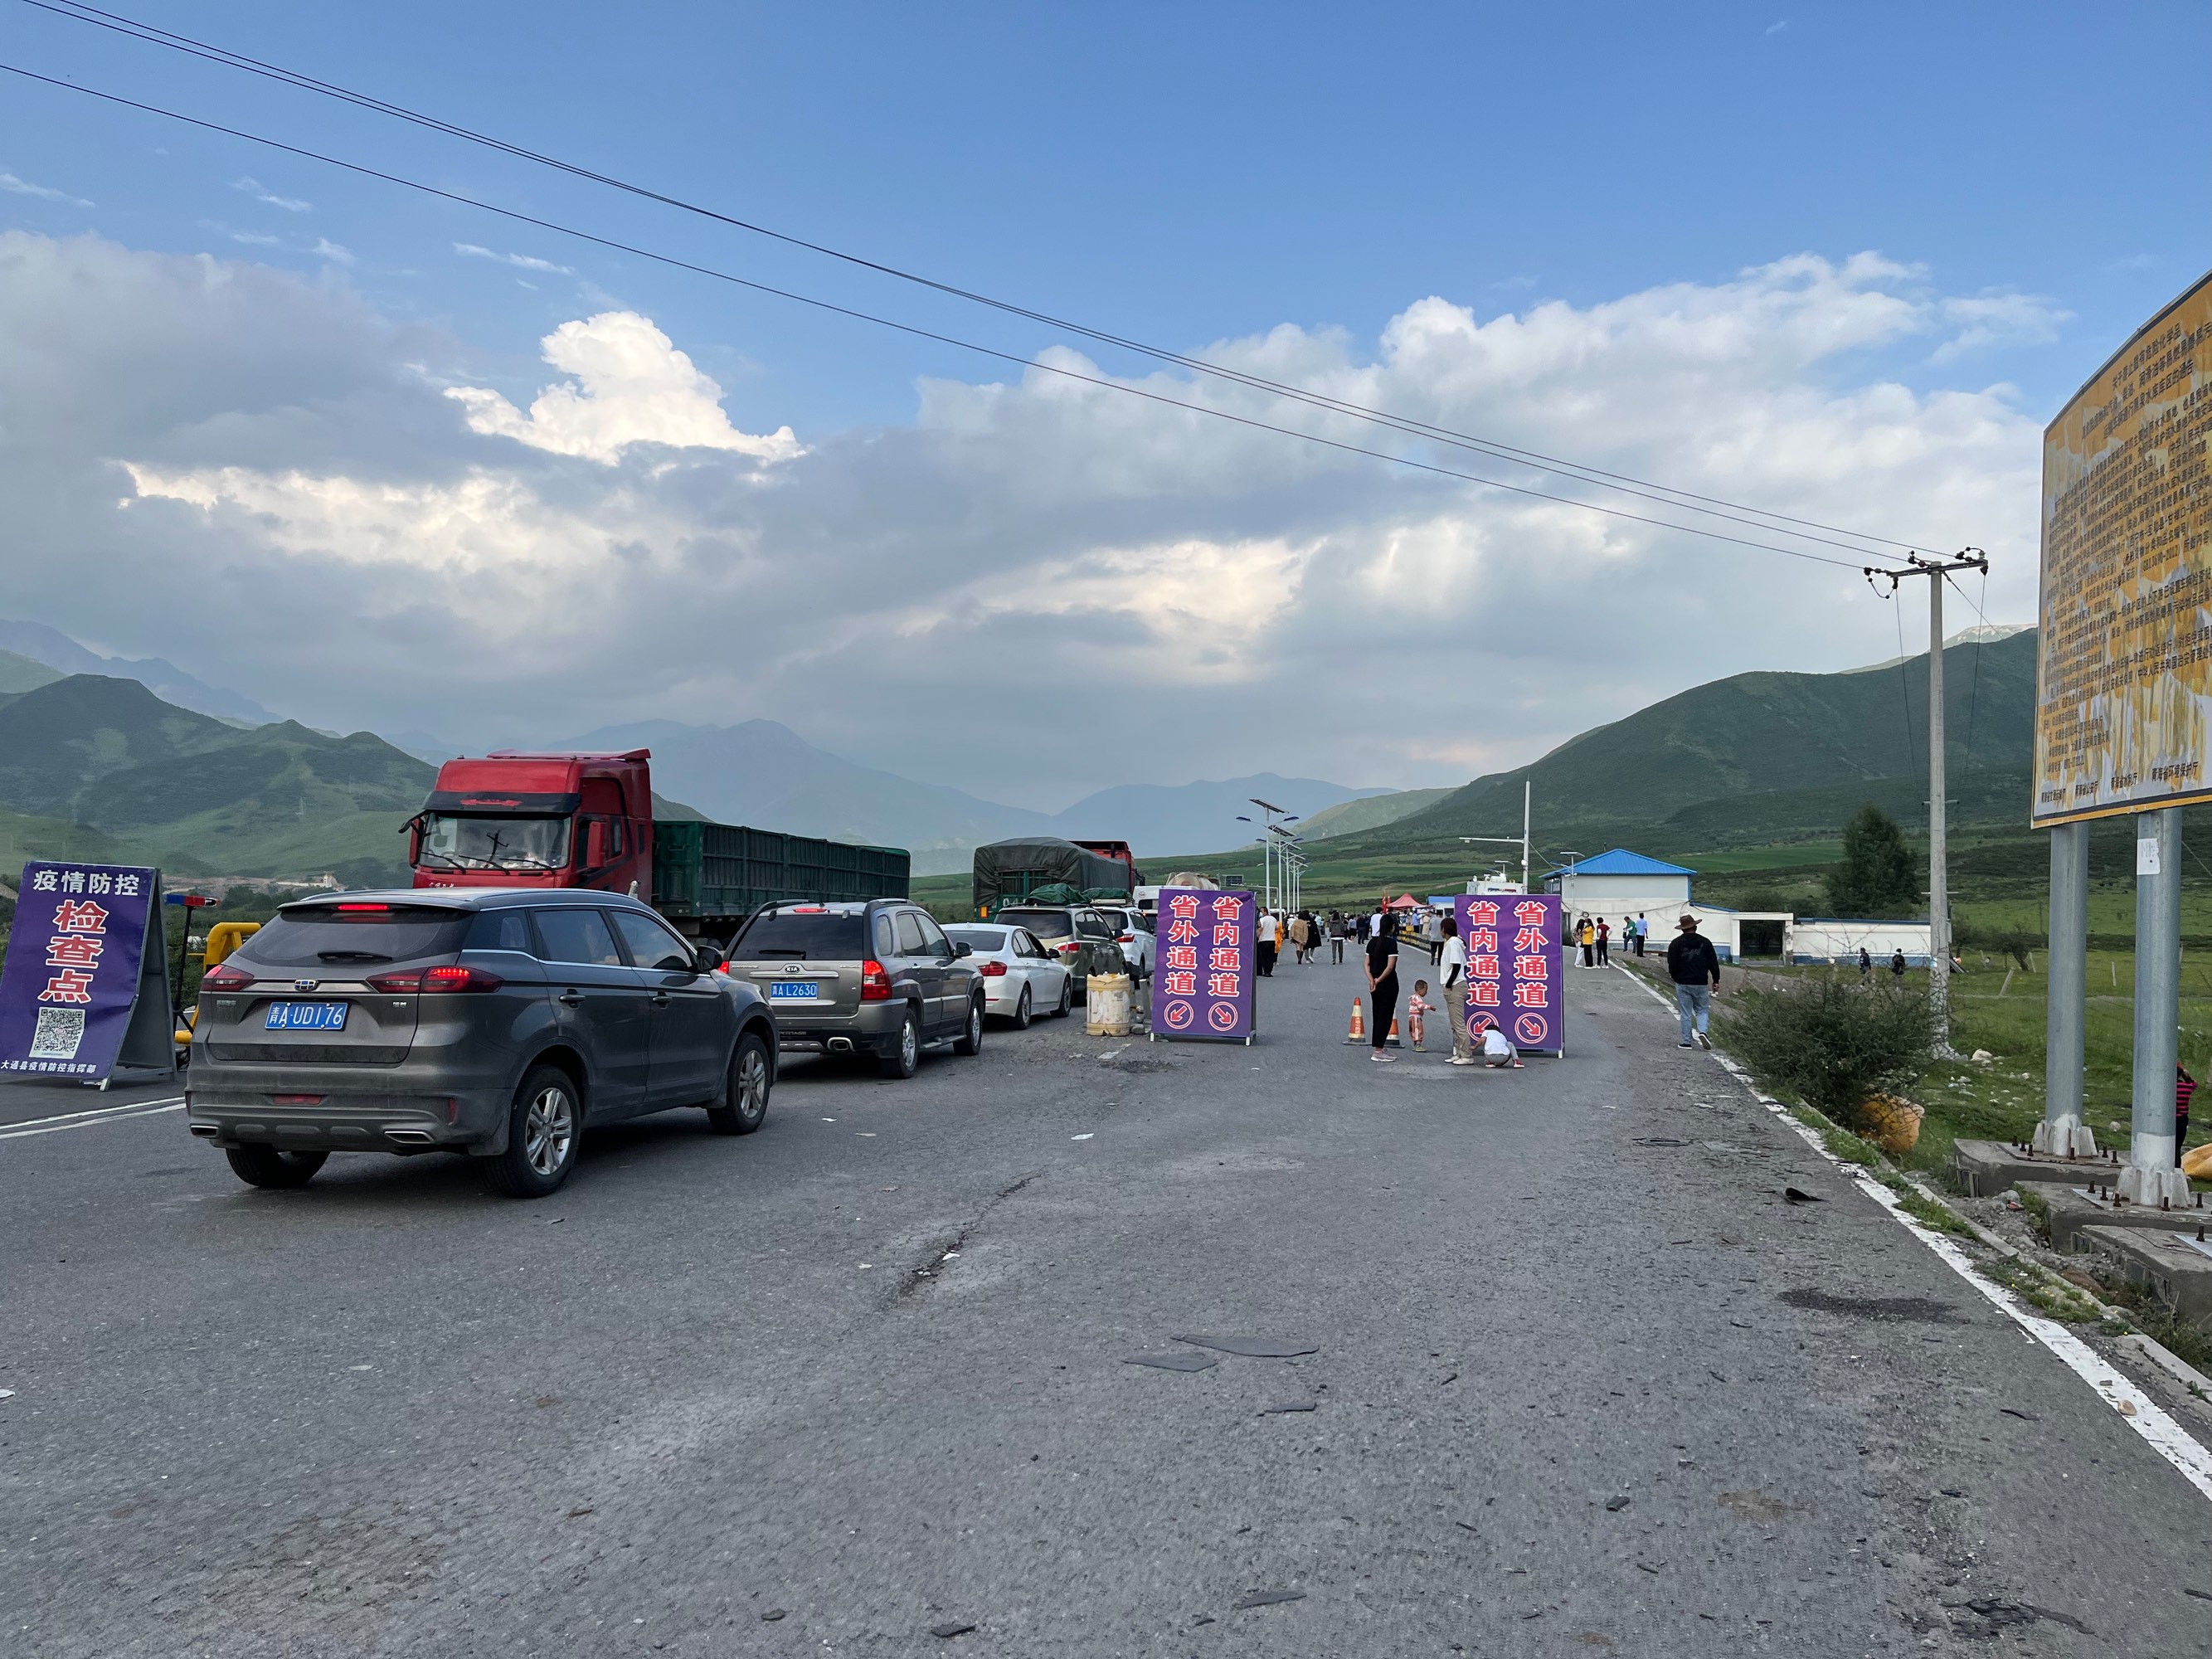 Checkpoint for nucleic acid testing at the provincial border